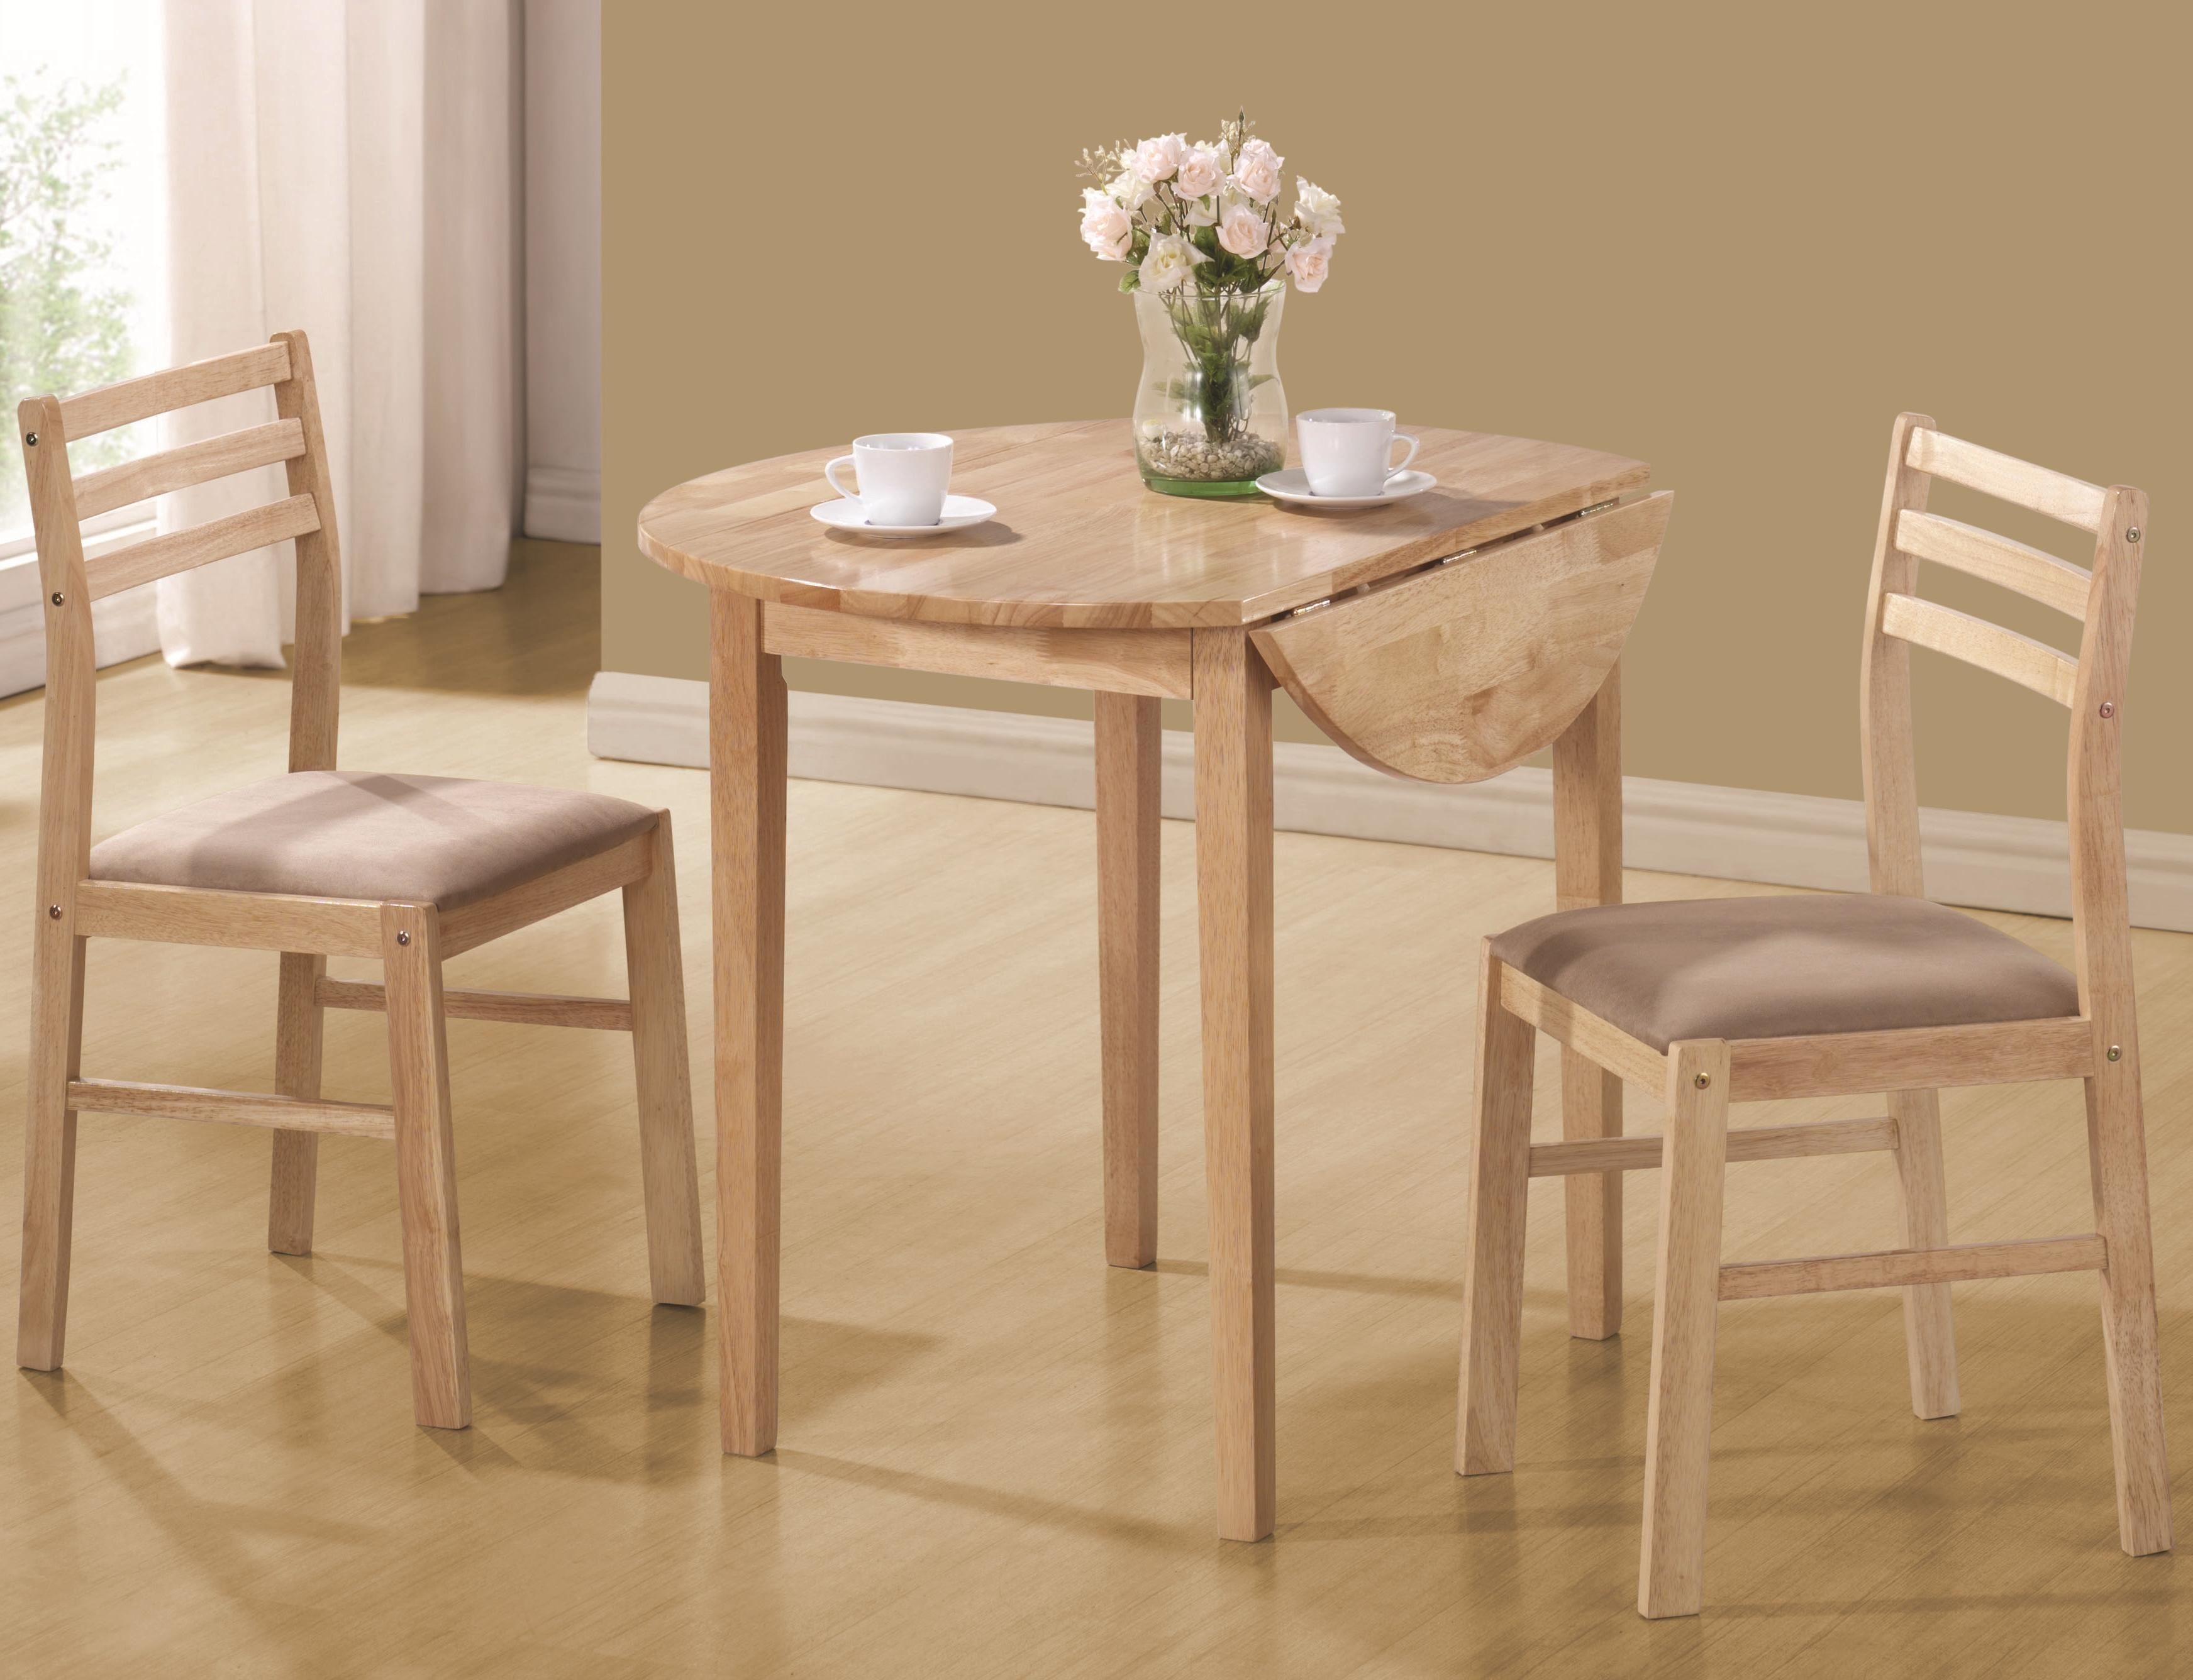 Dinettes Casual 3 Piece Table & Chair Setcoaster At Value City Furniture With Regard To Current 3 Piece Breakfast Dining Sets (Photo 35434 of 35622)